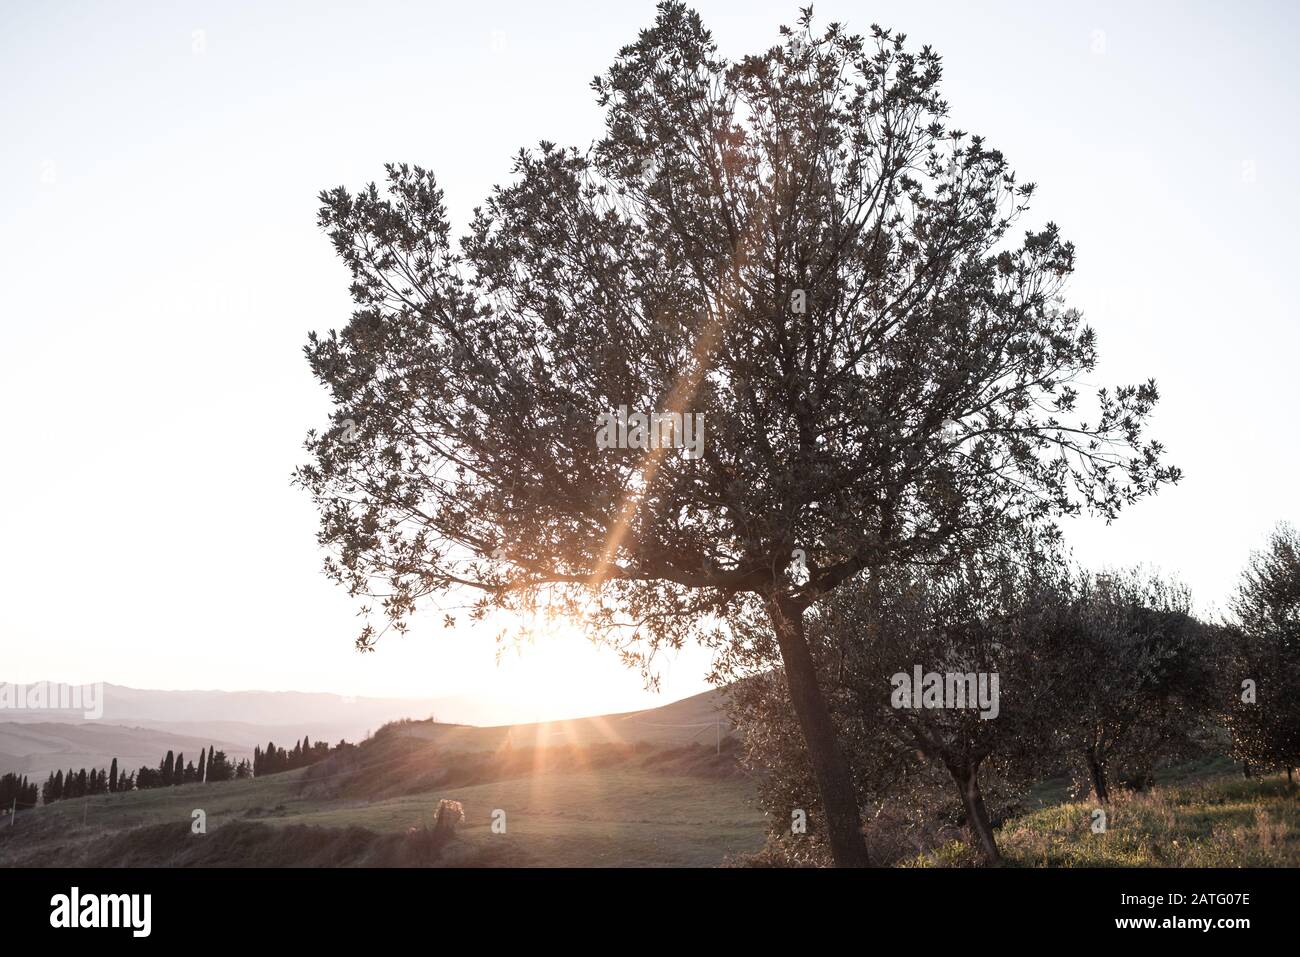 Olive tree dramatic silhouette with direct sunlight in camera Stock Photo